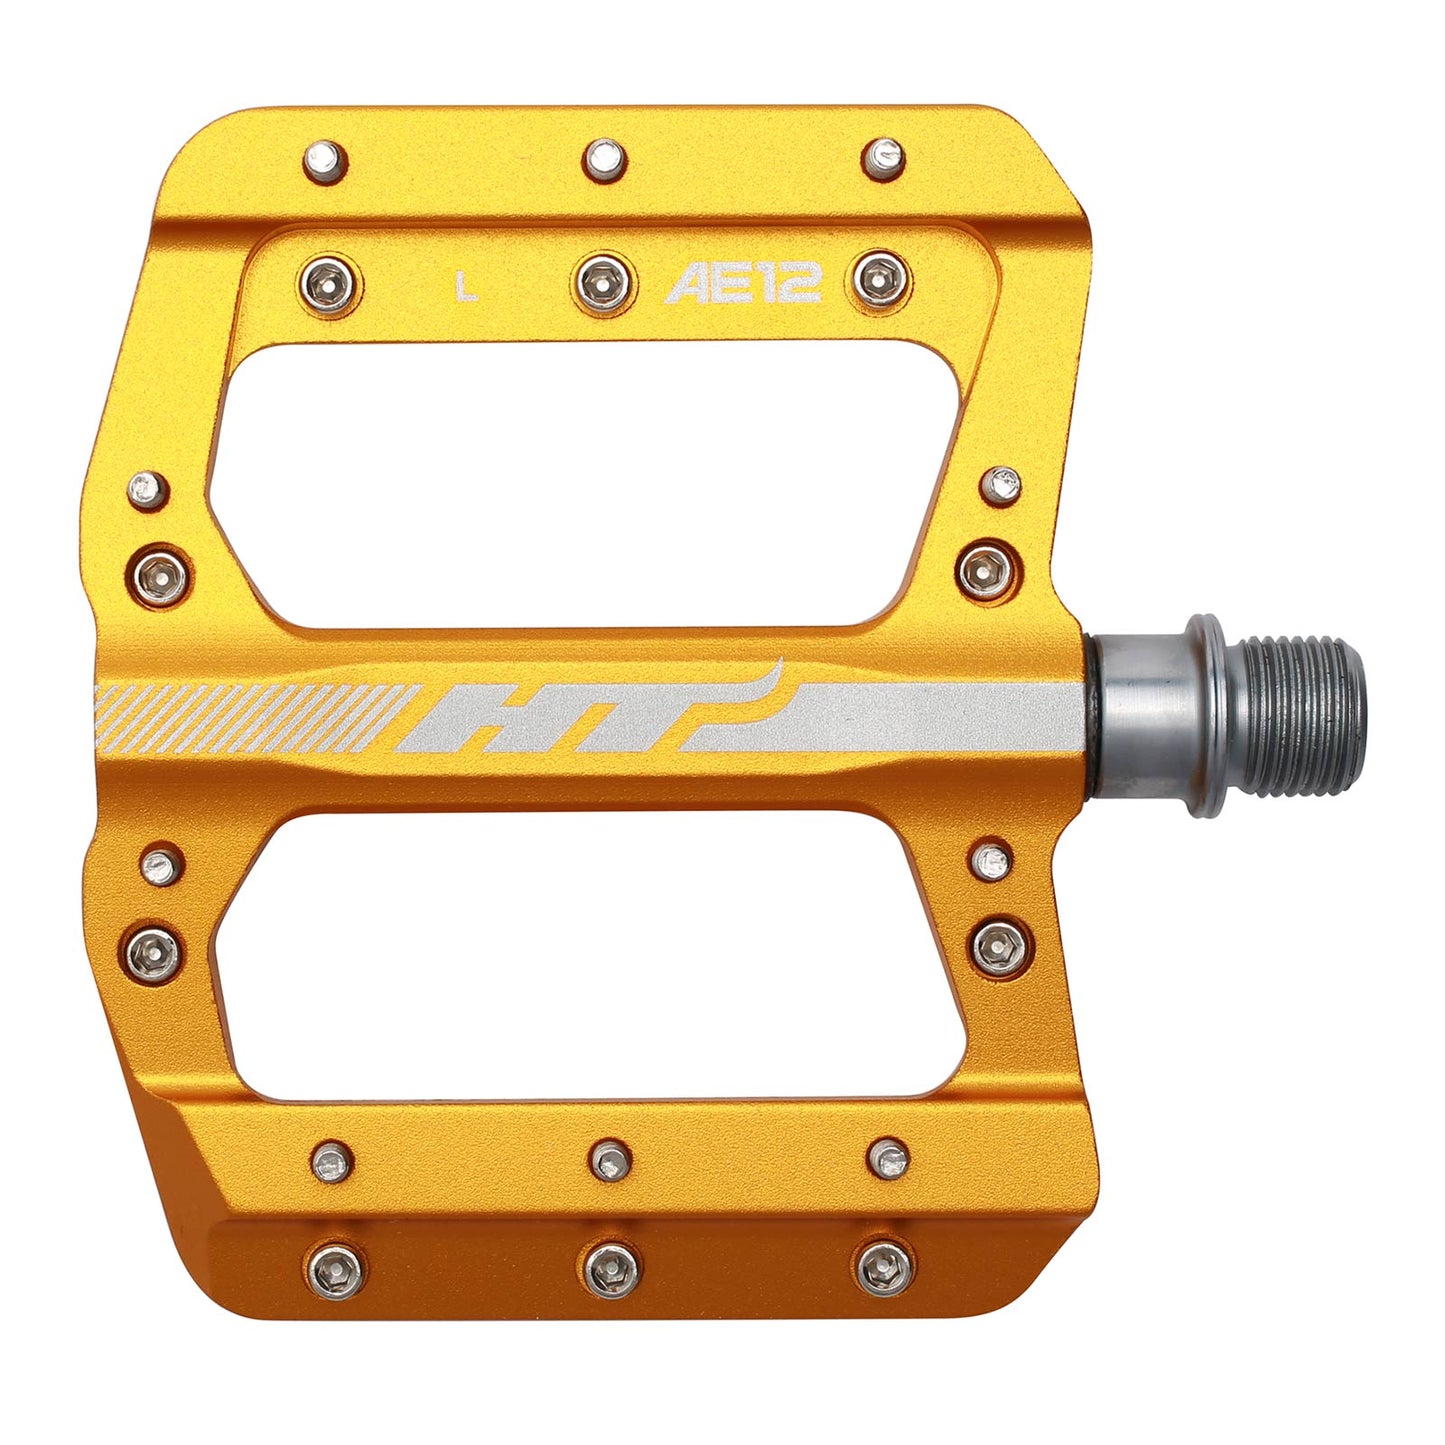 Ht AE12 Pedals Alloy / CNC CRMO - Gold